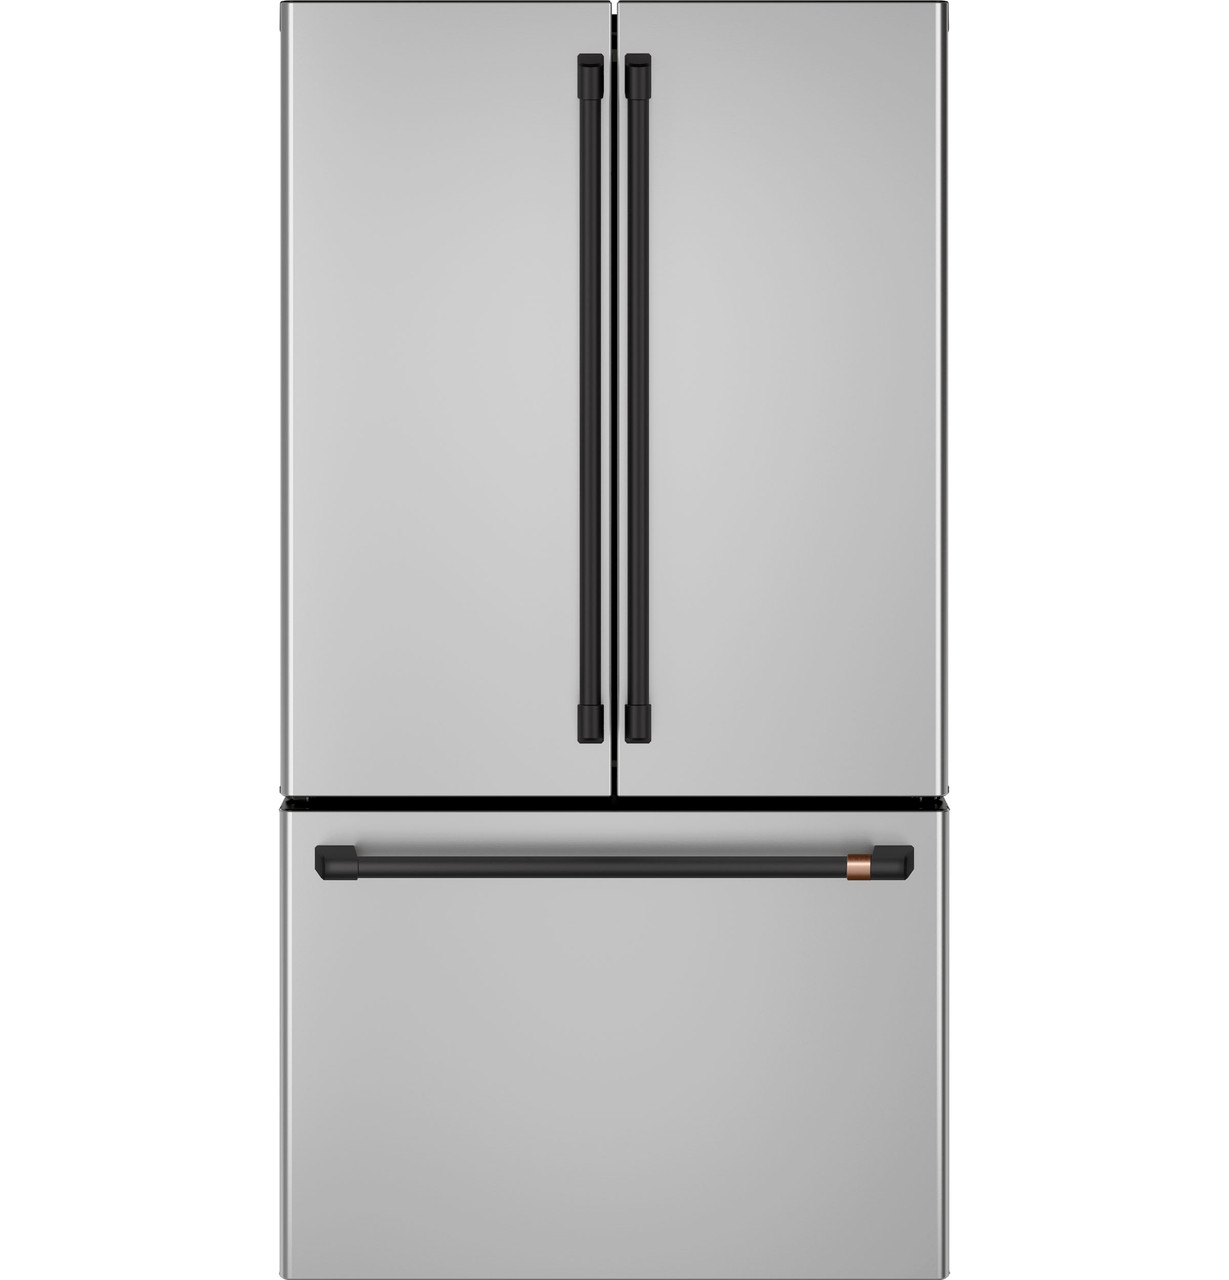 Questions about water line to Fridge -  Community